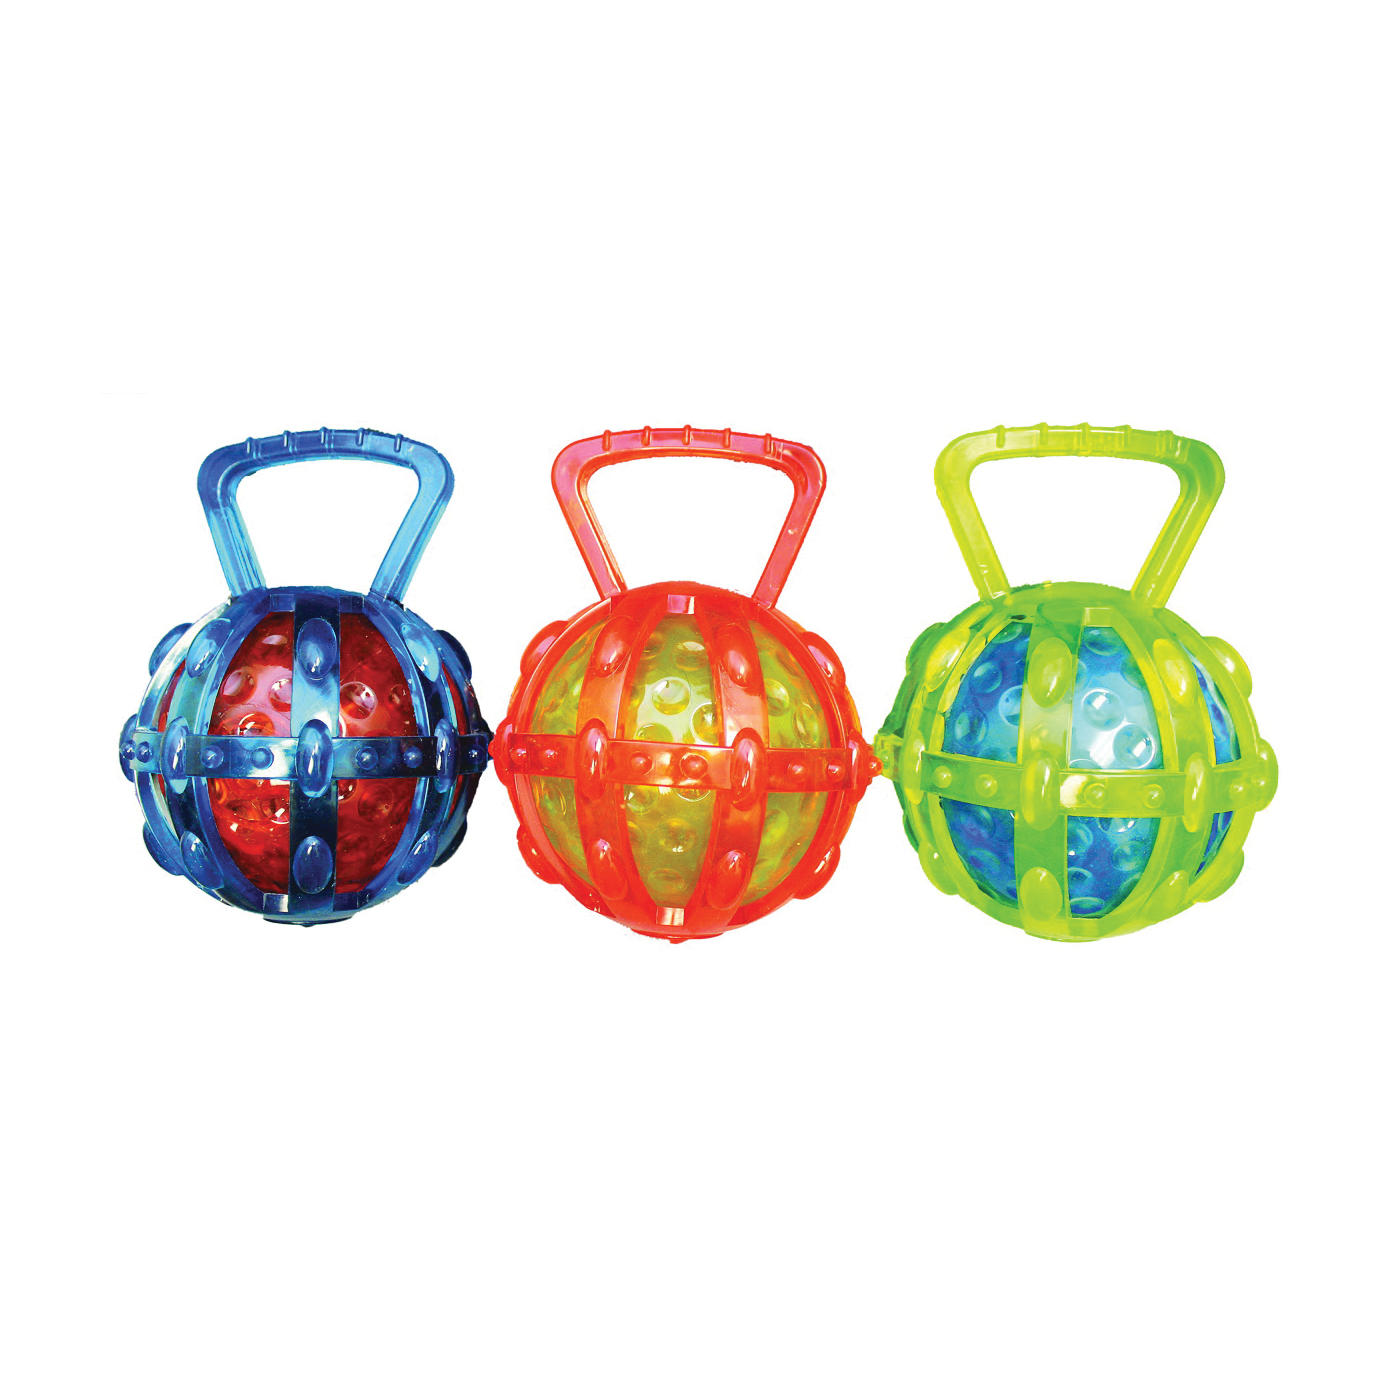 WB15519 Dog Toy, Cage, Thermoplastic Rubber